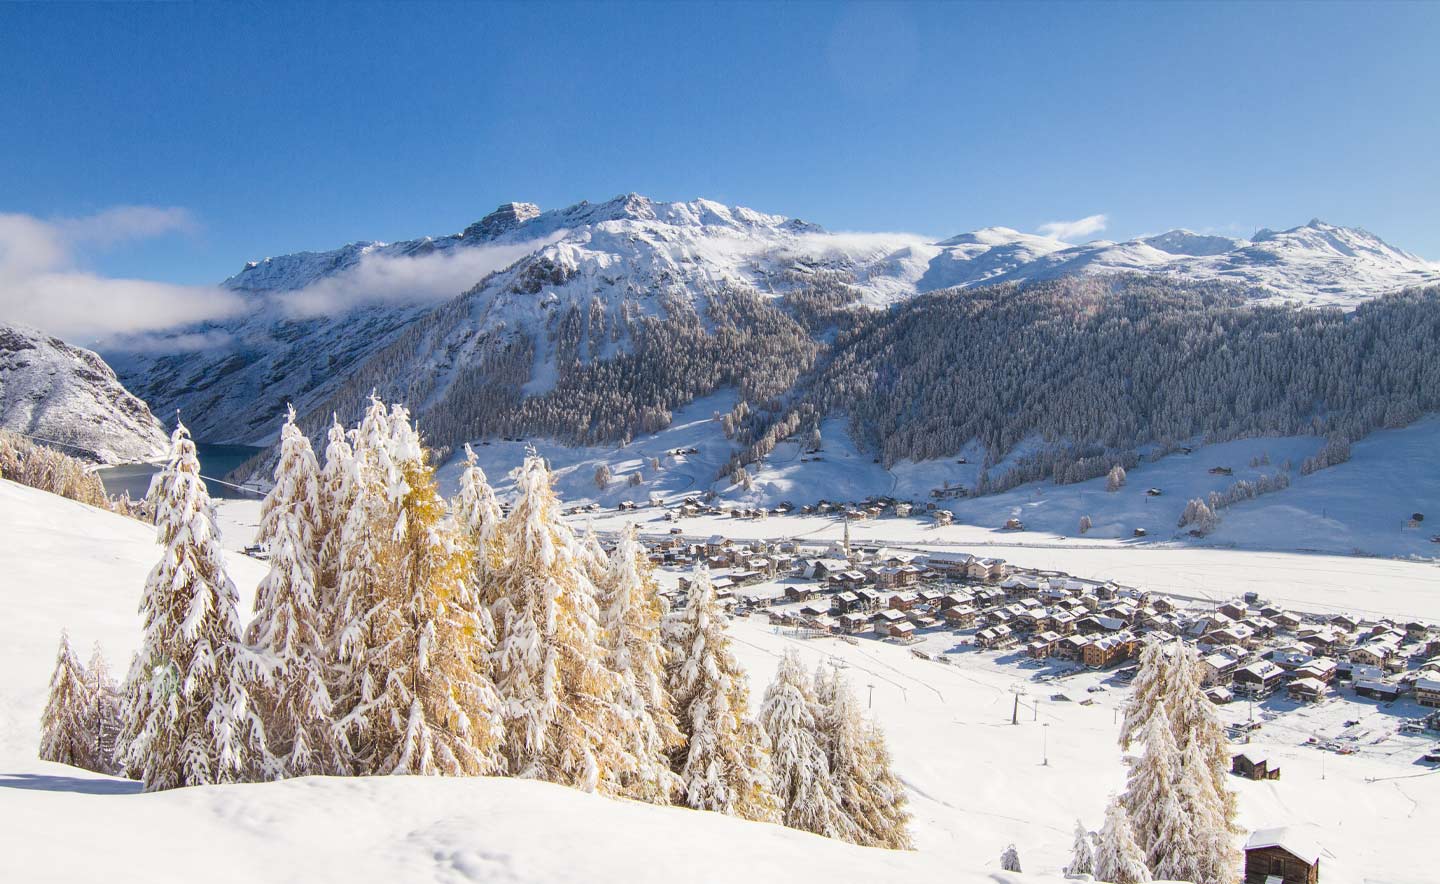 Snowy landscape amidst the mountains of Livigno